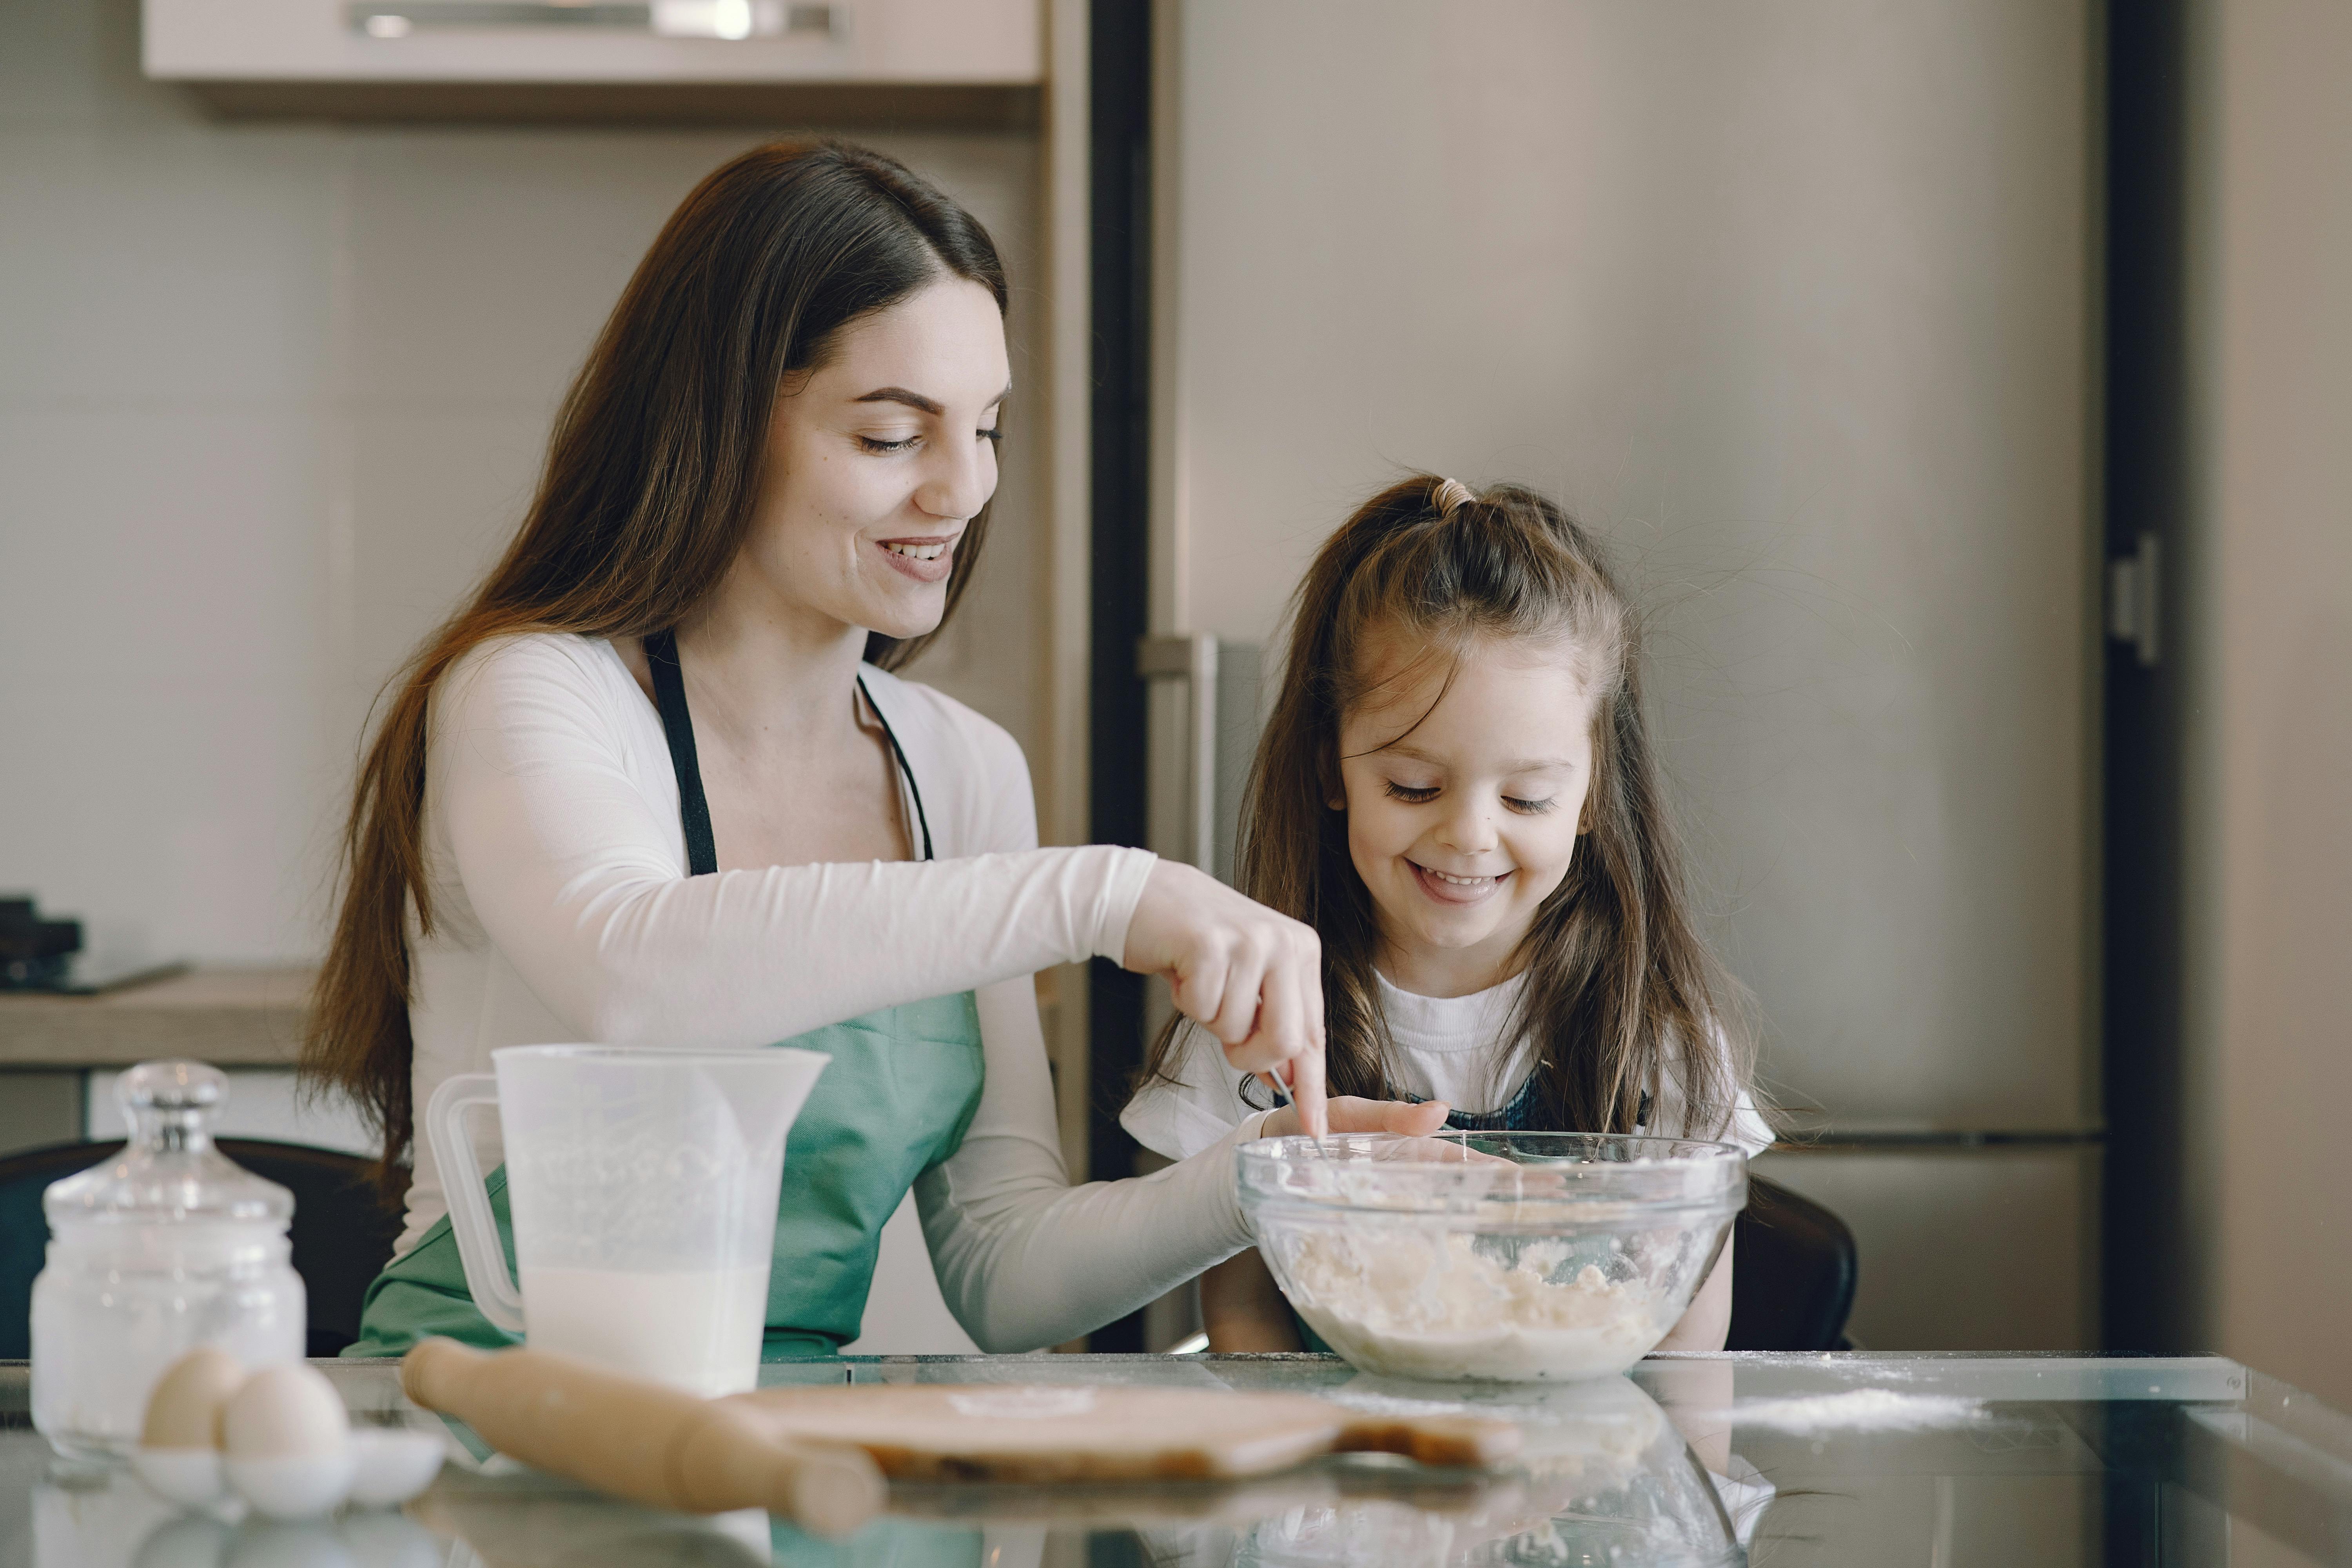 Woman and child smiling while baking. | Photo: Pexels